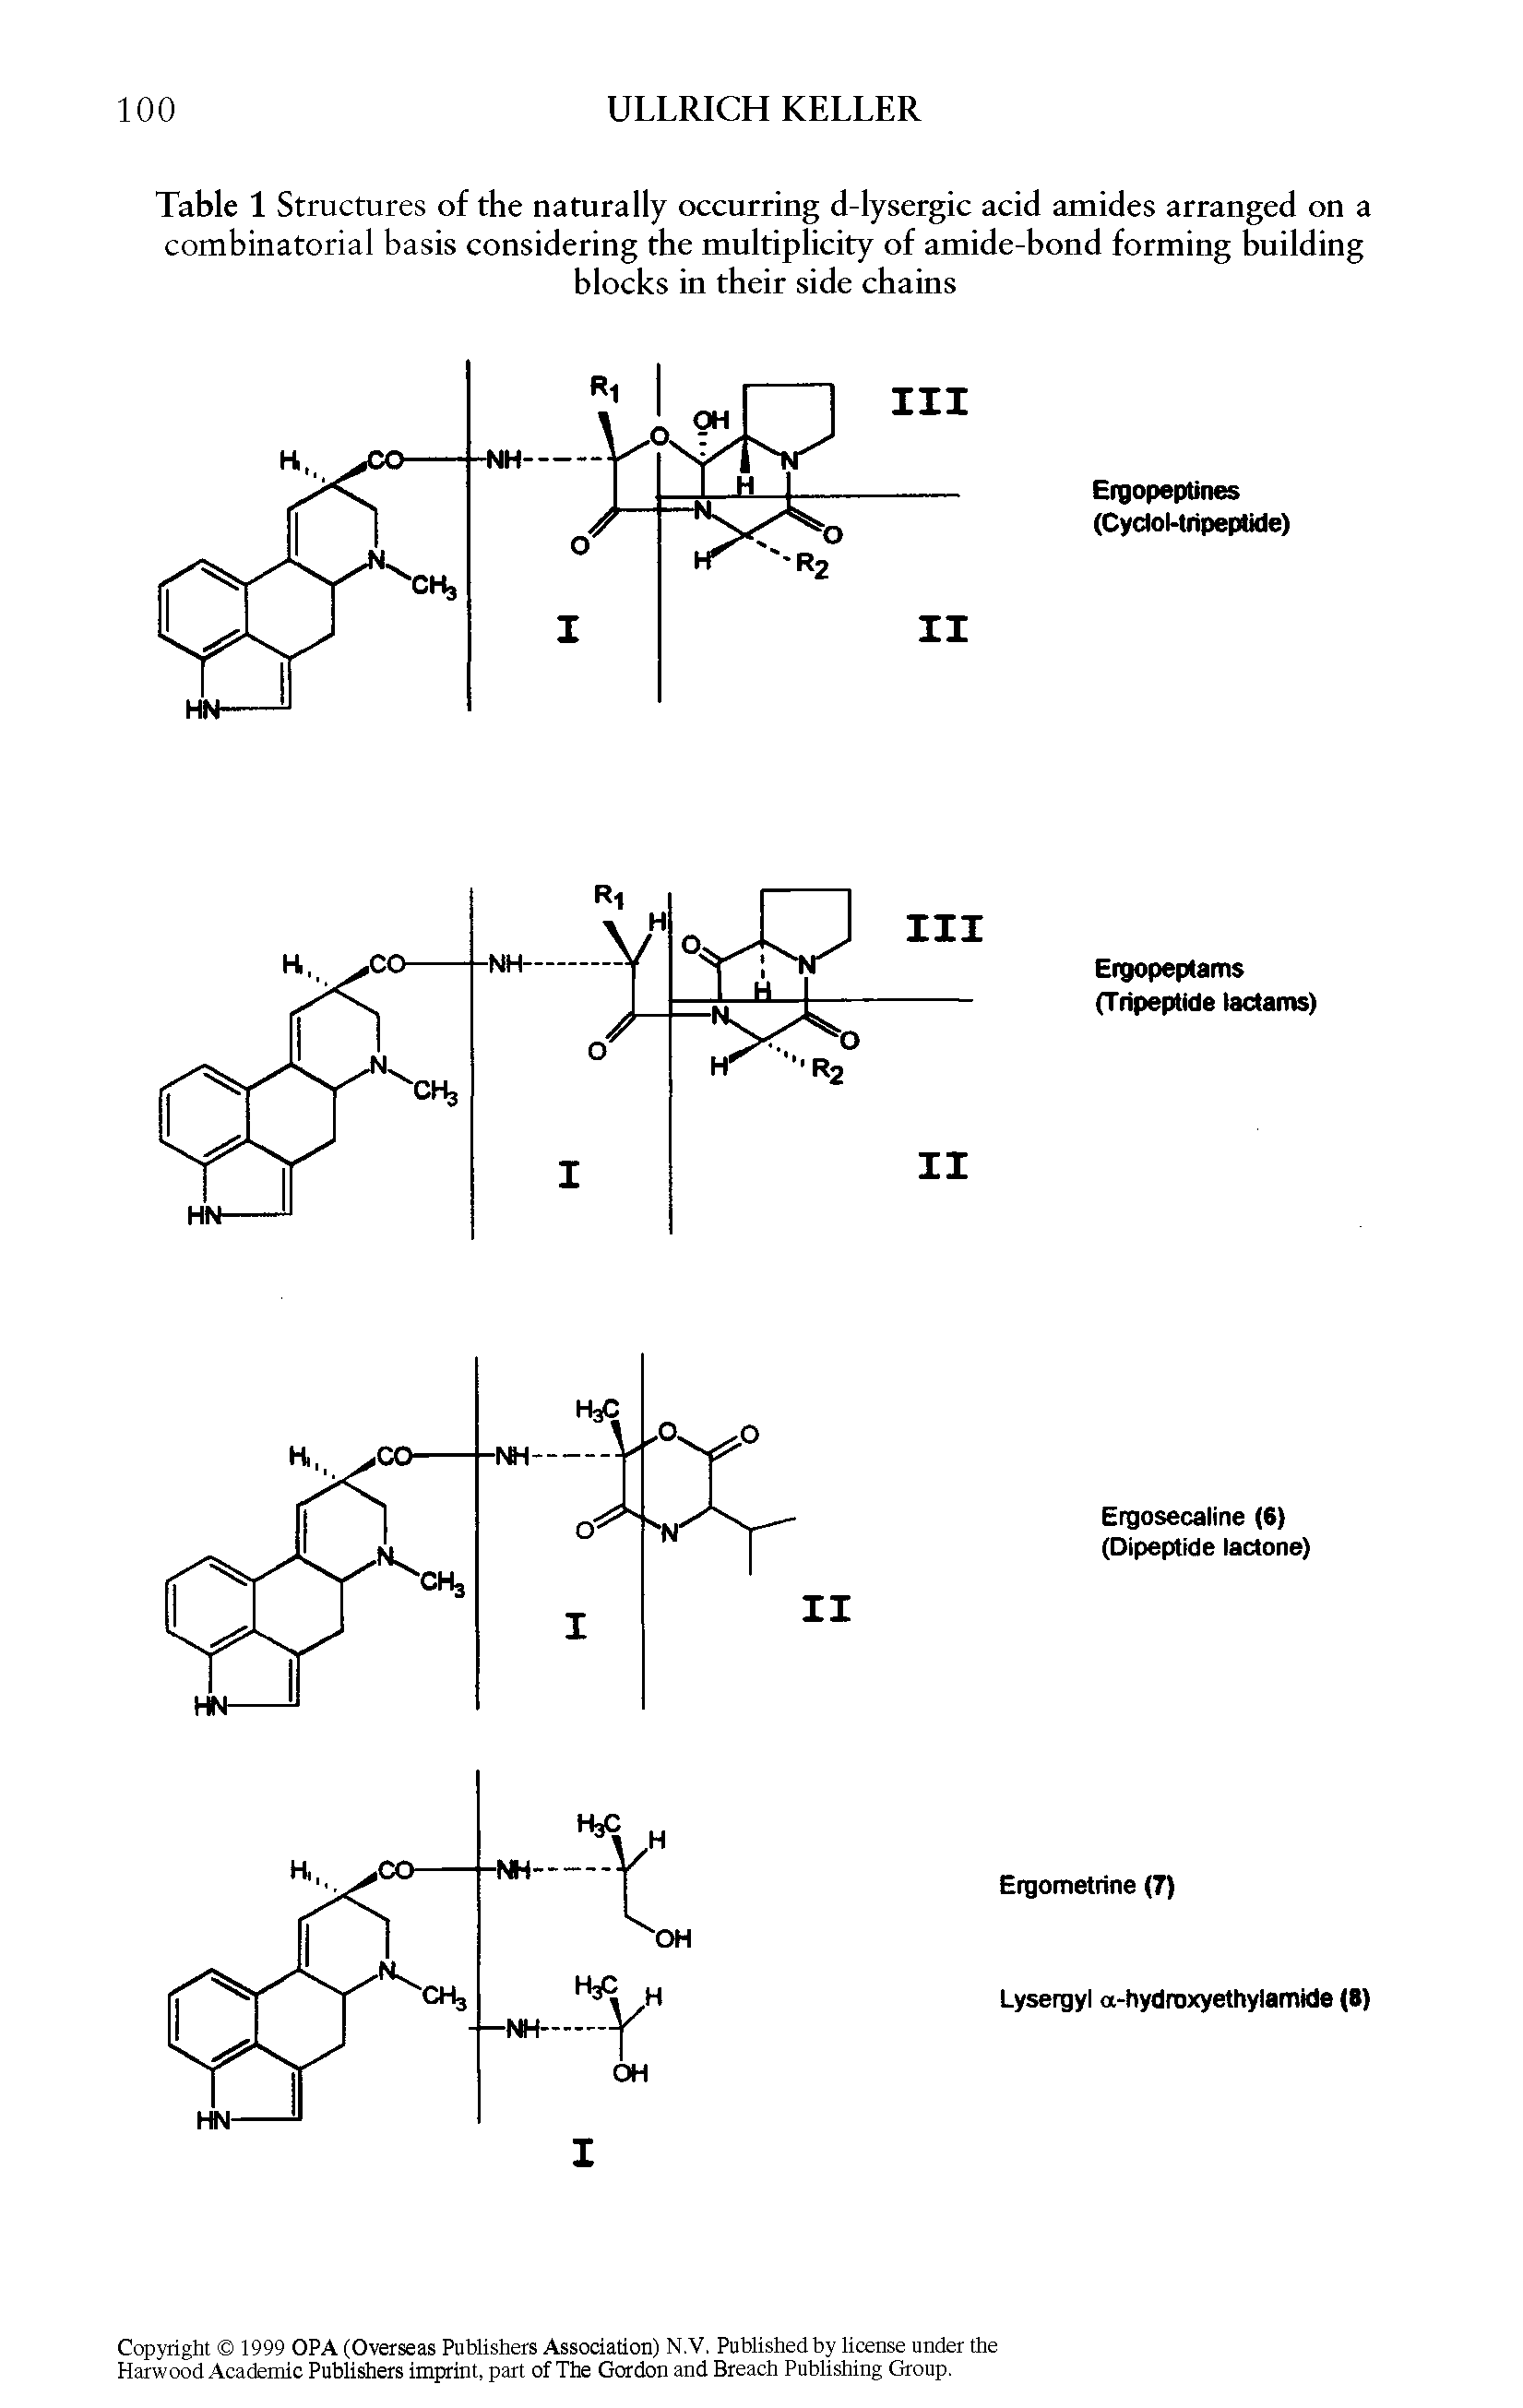 Table 1 Structures of the naturally occurring d-lysergic acid amides arranged on a combinatorial basis considering the multiplicity of amide-bond forming building blocks in their side chains...